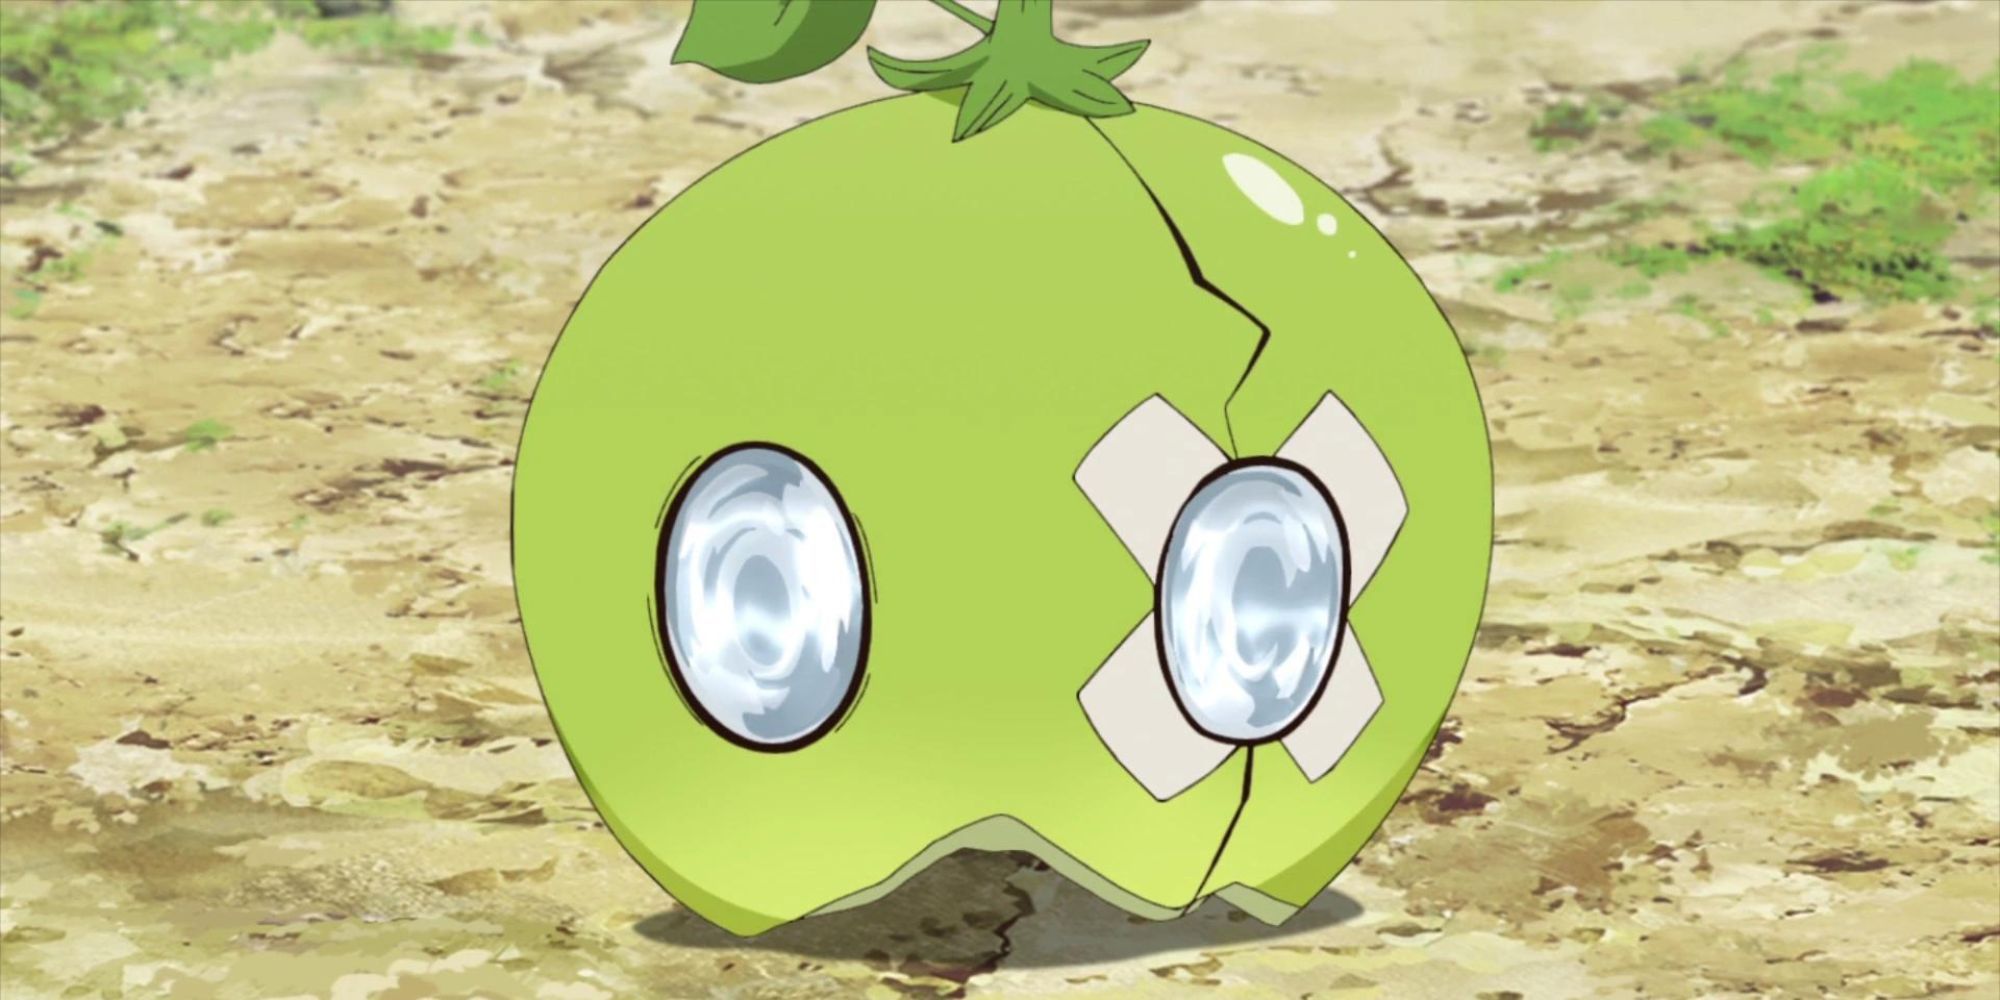 Melon Glasses from Dr. Stone